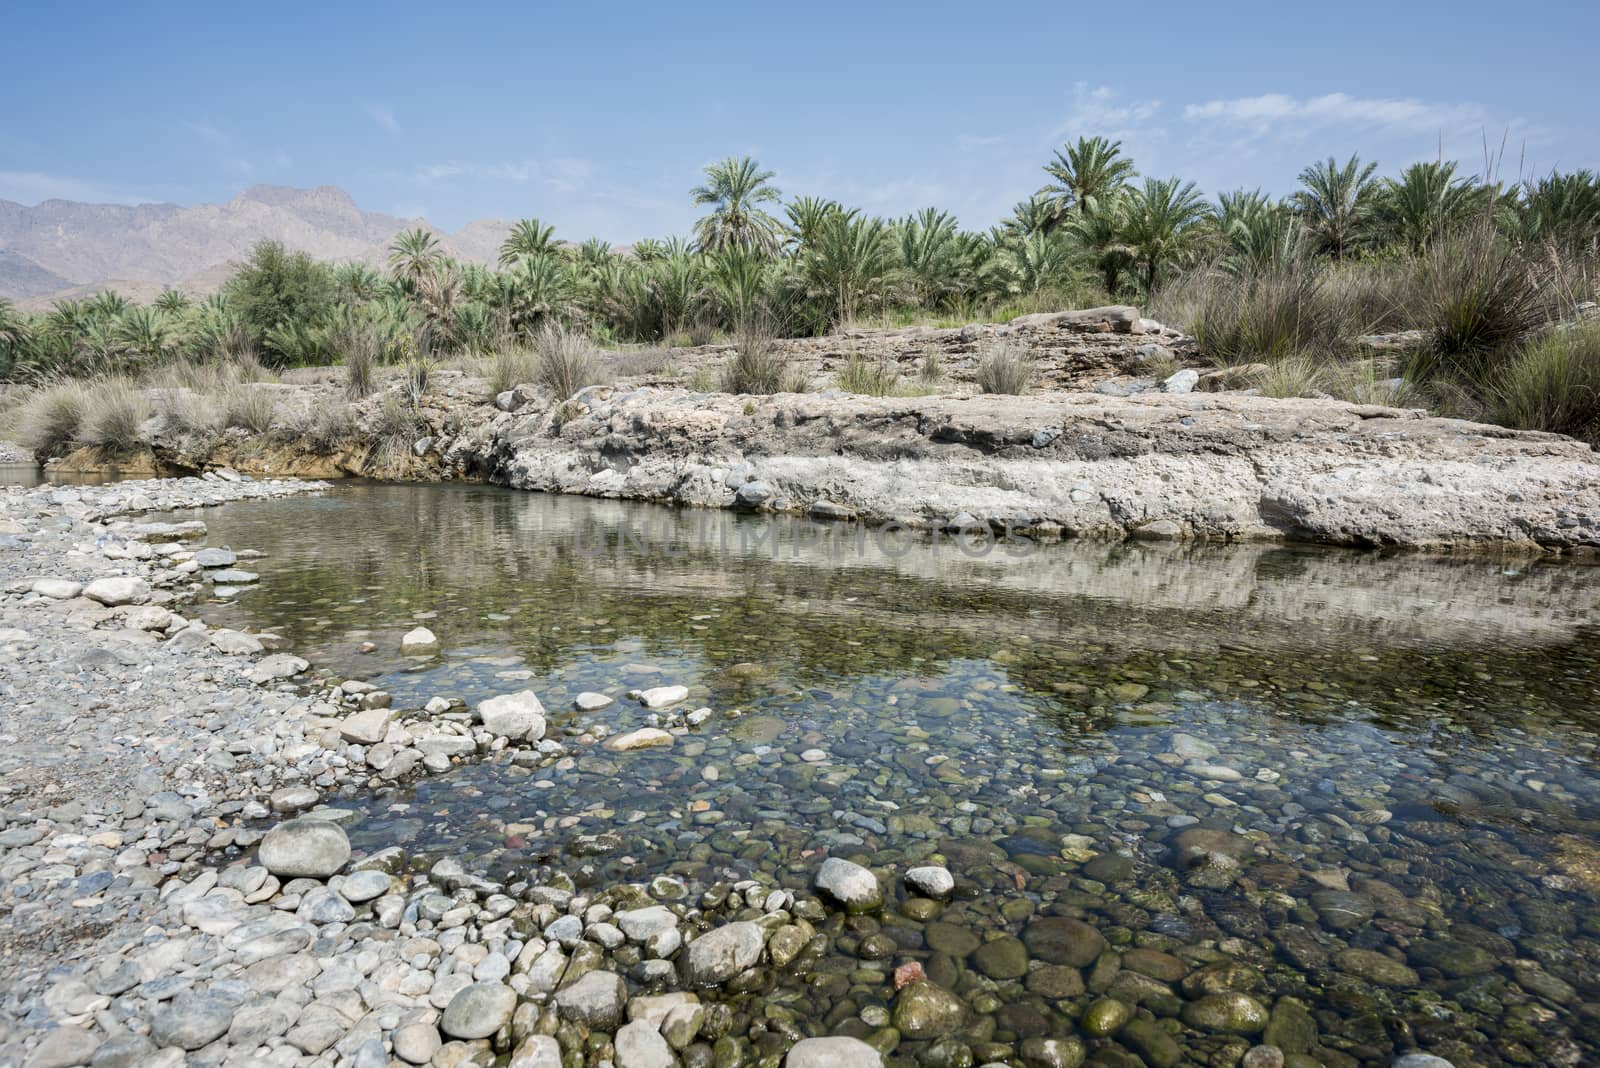 Palm groove in a wadi close to a river, Sultanate of Oman by GABIS